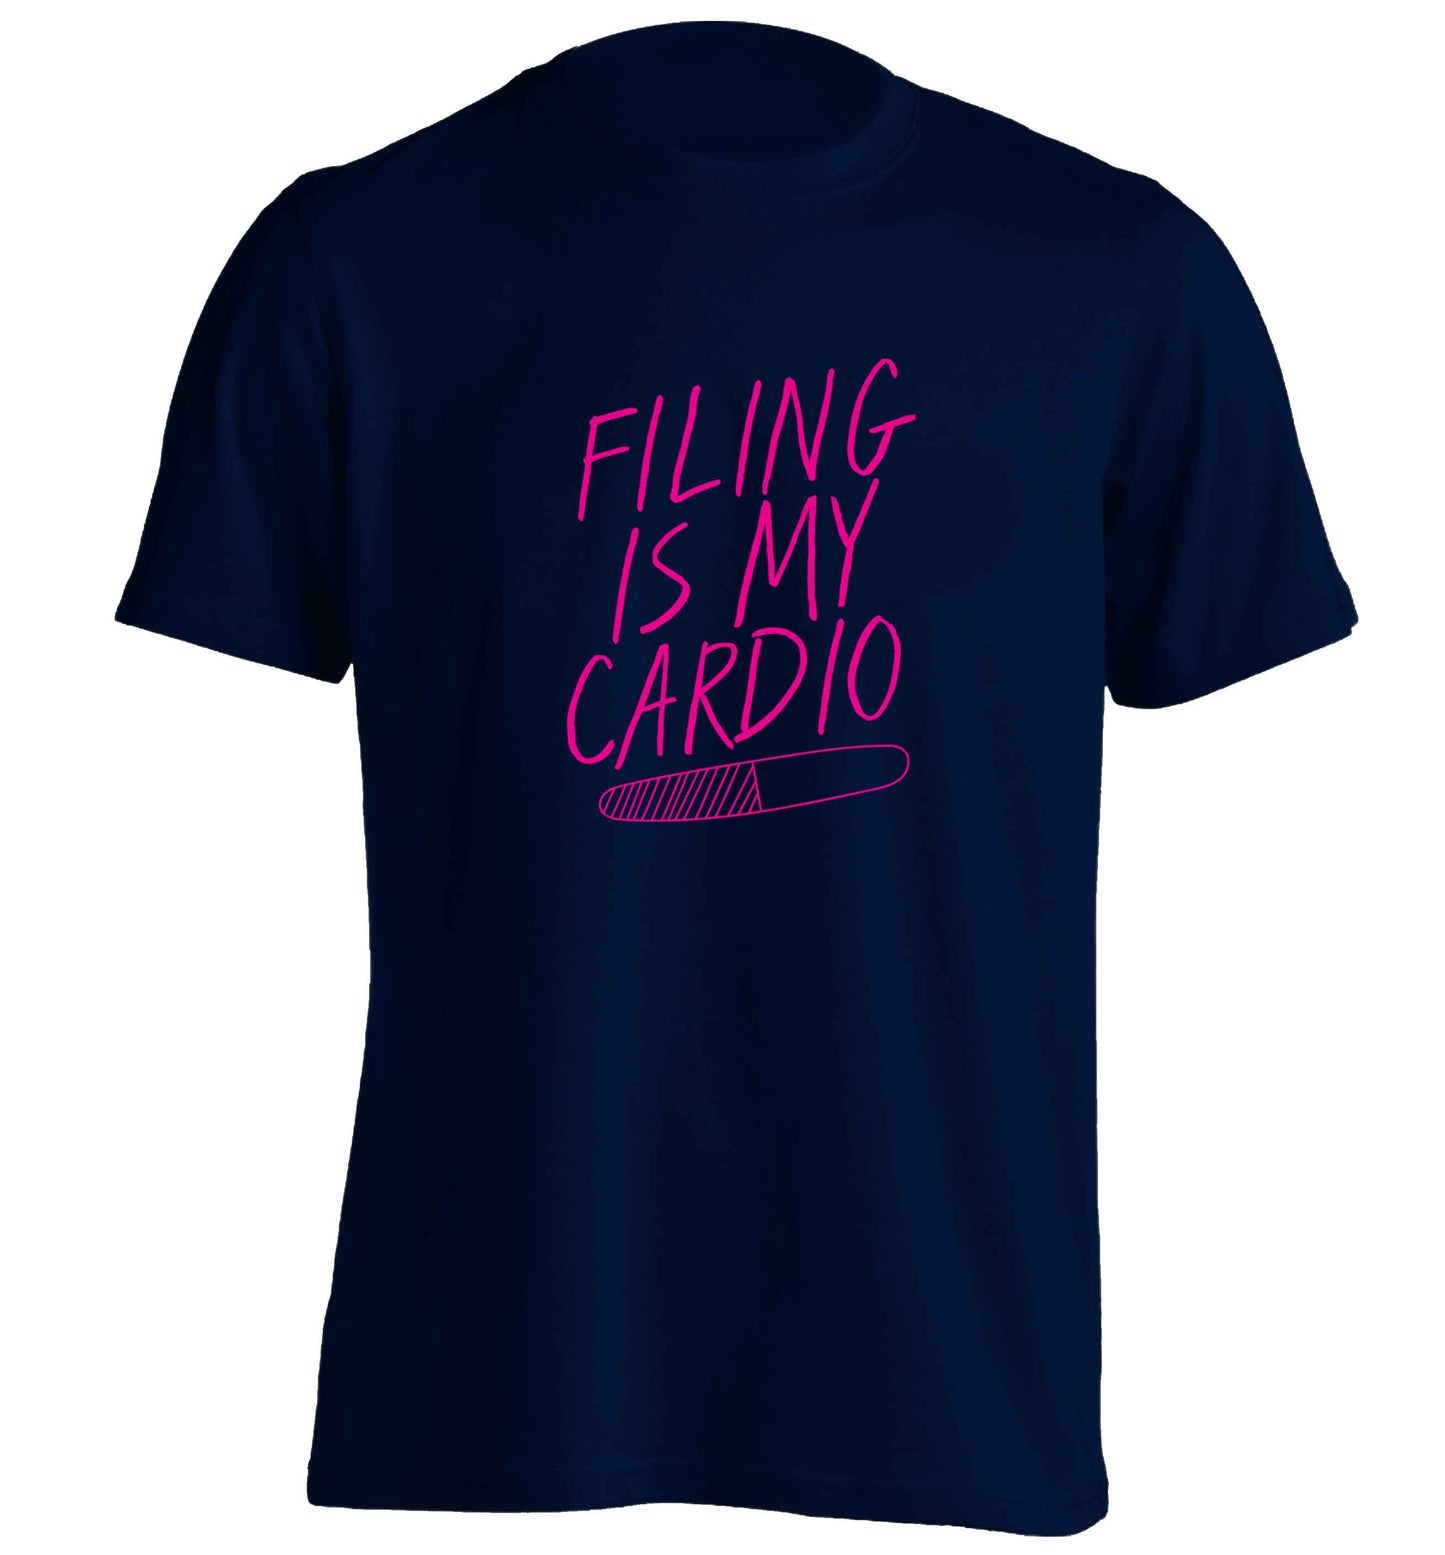 neon pink filing is my cardio adults unisex navy Tshirt 2XL